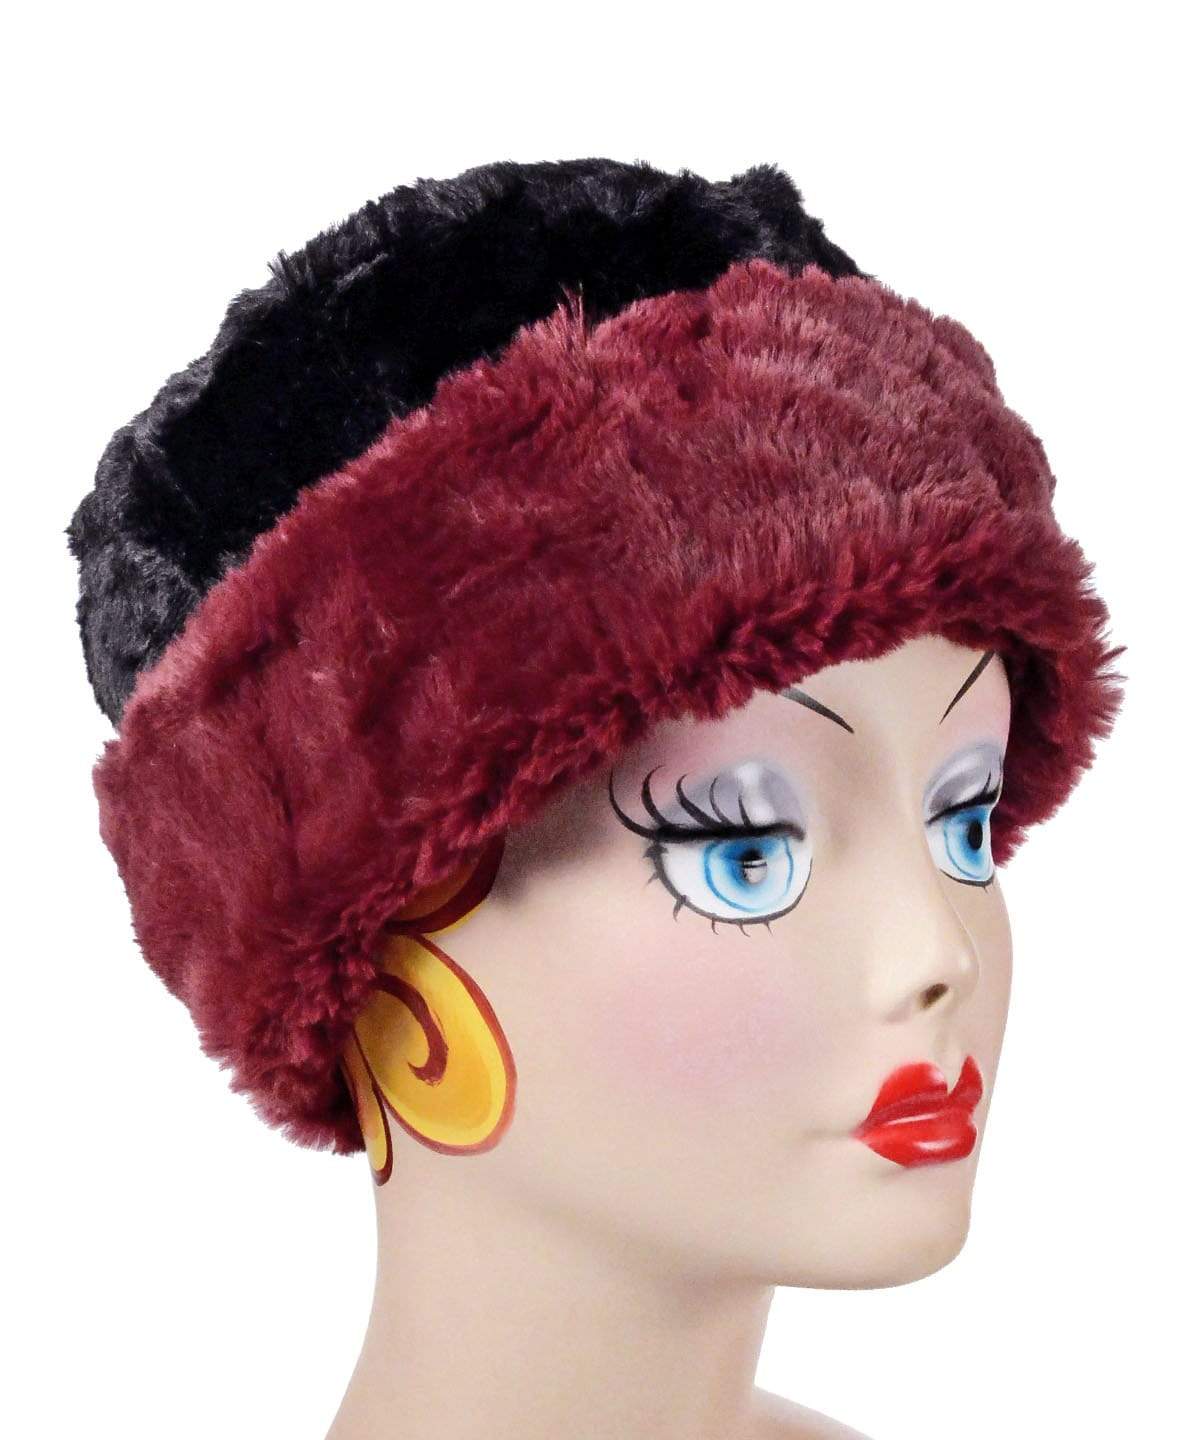   Women&#39;s Cuffed Pillbox on mannequin | Cranberry Creek Faux Fur  with Cuddly Black| shown in reverse Handmade USA by Pandemonium Seattle